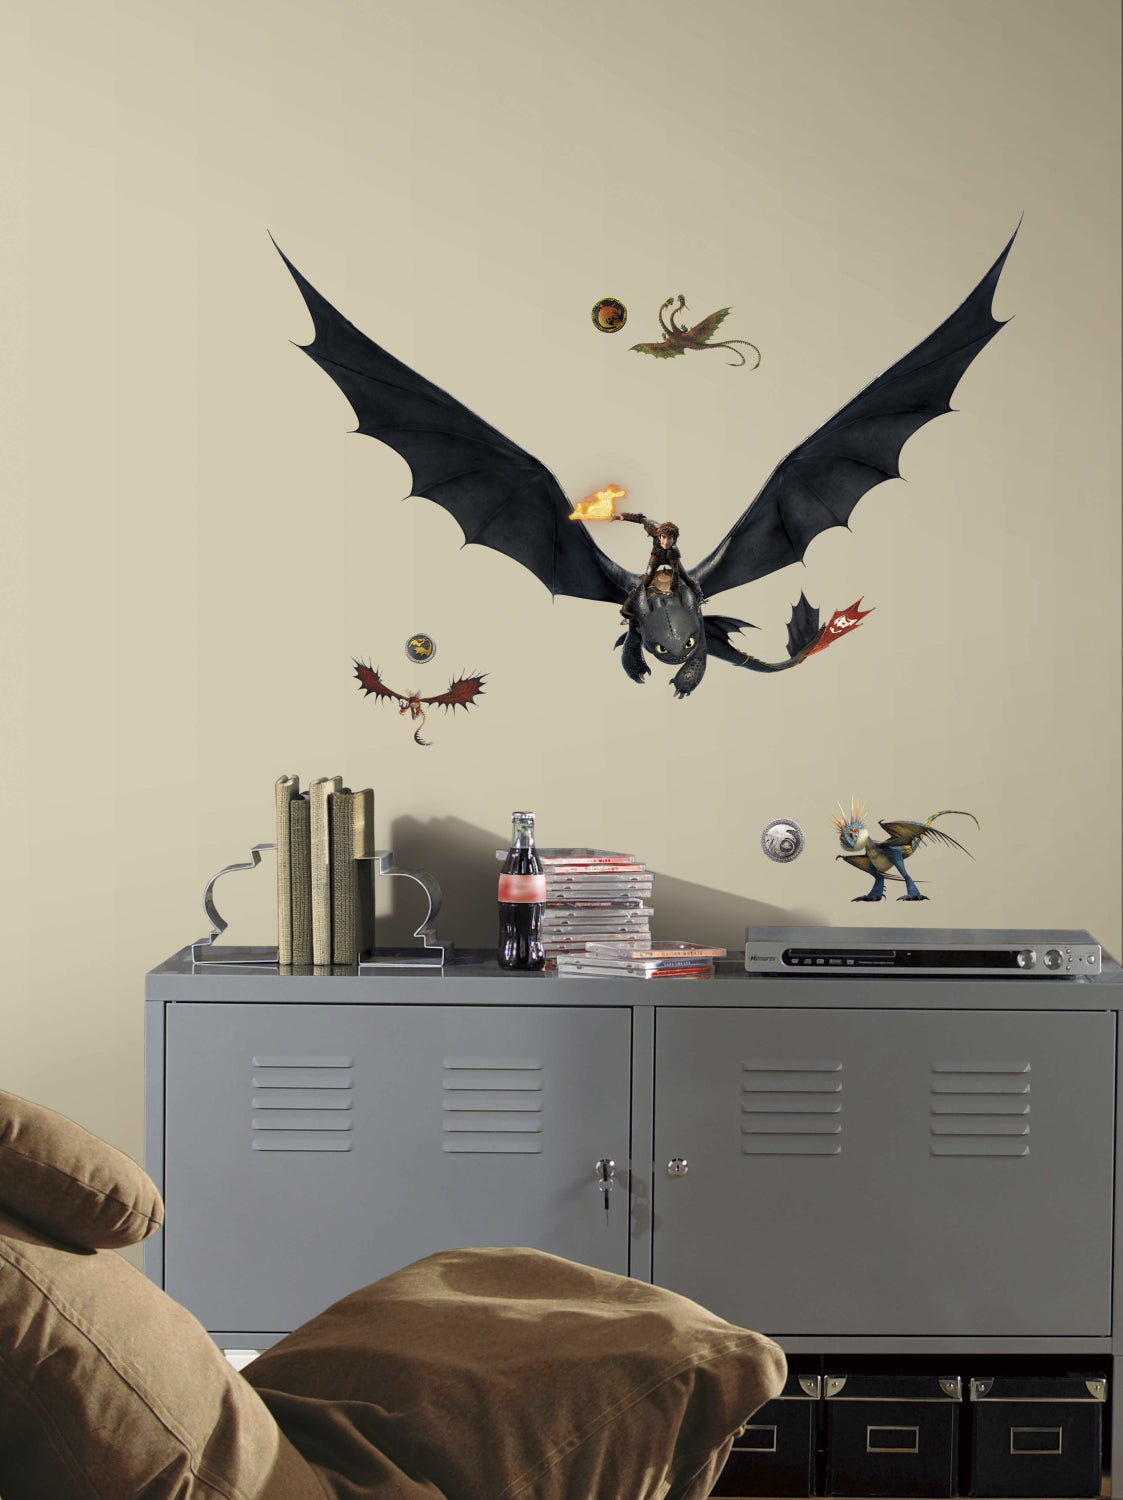 How to Train Your Dragon 2 Hiccup & Toothless Peel and Stick Giant Wall Decals